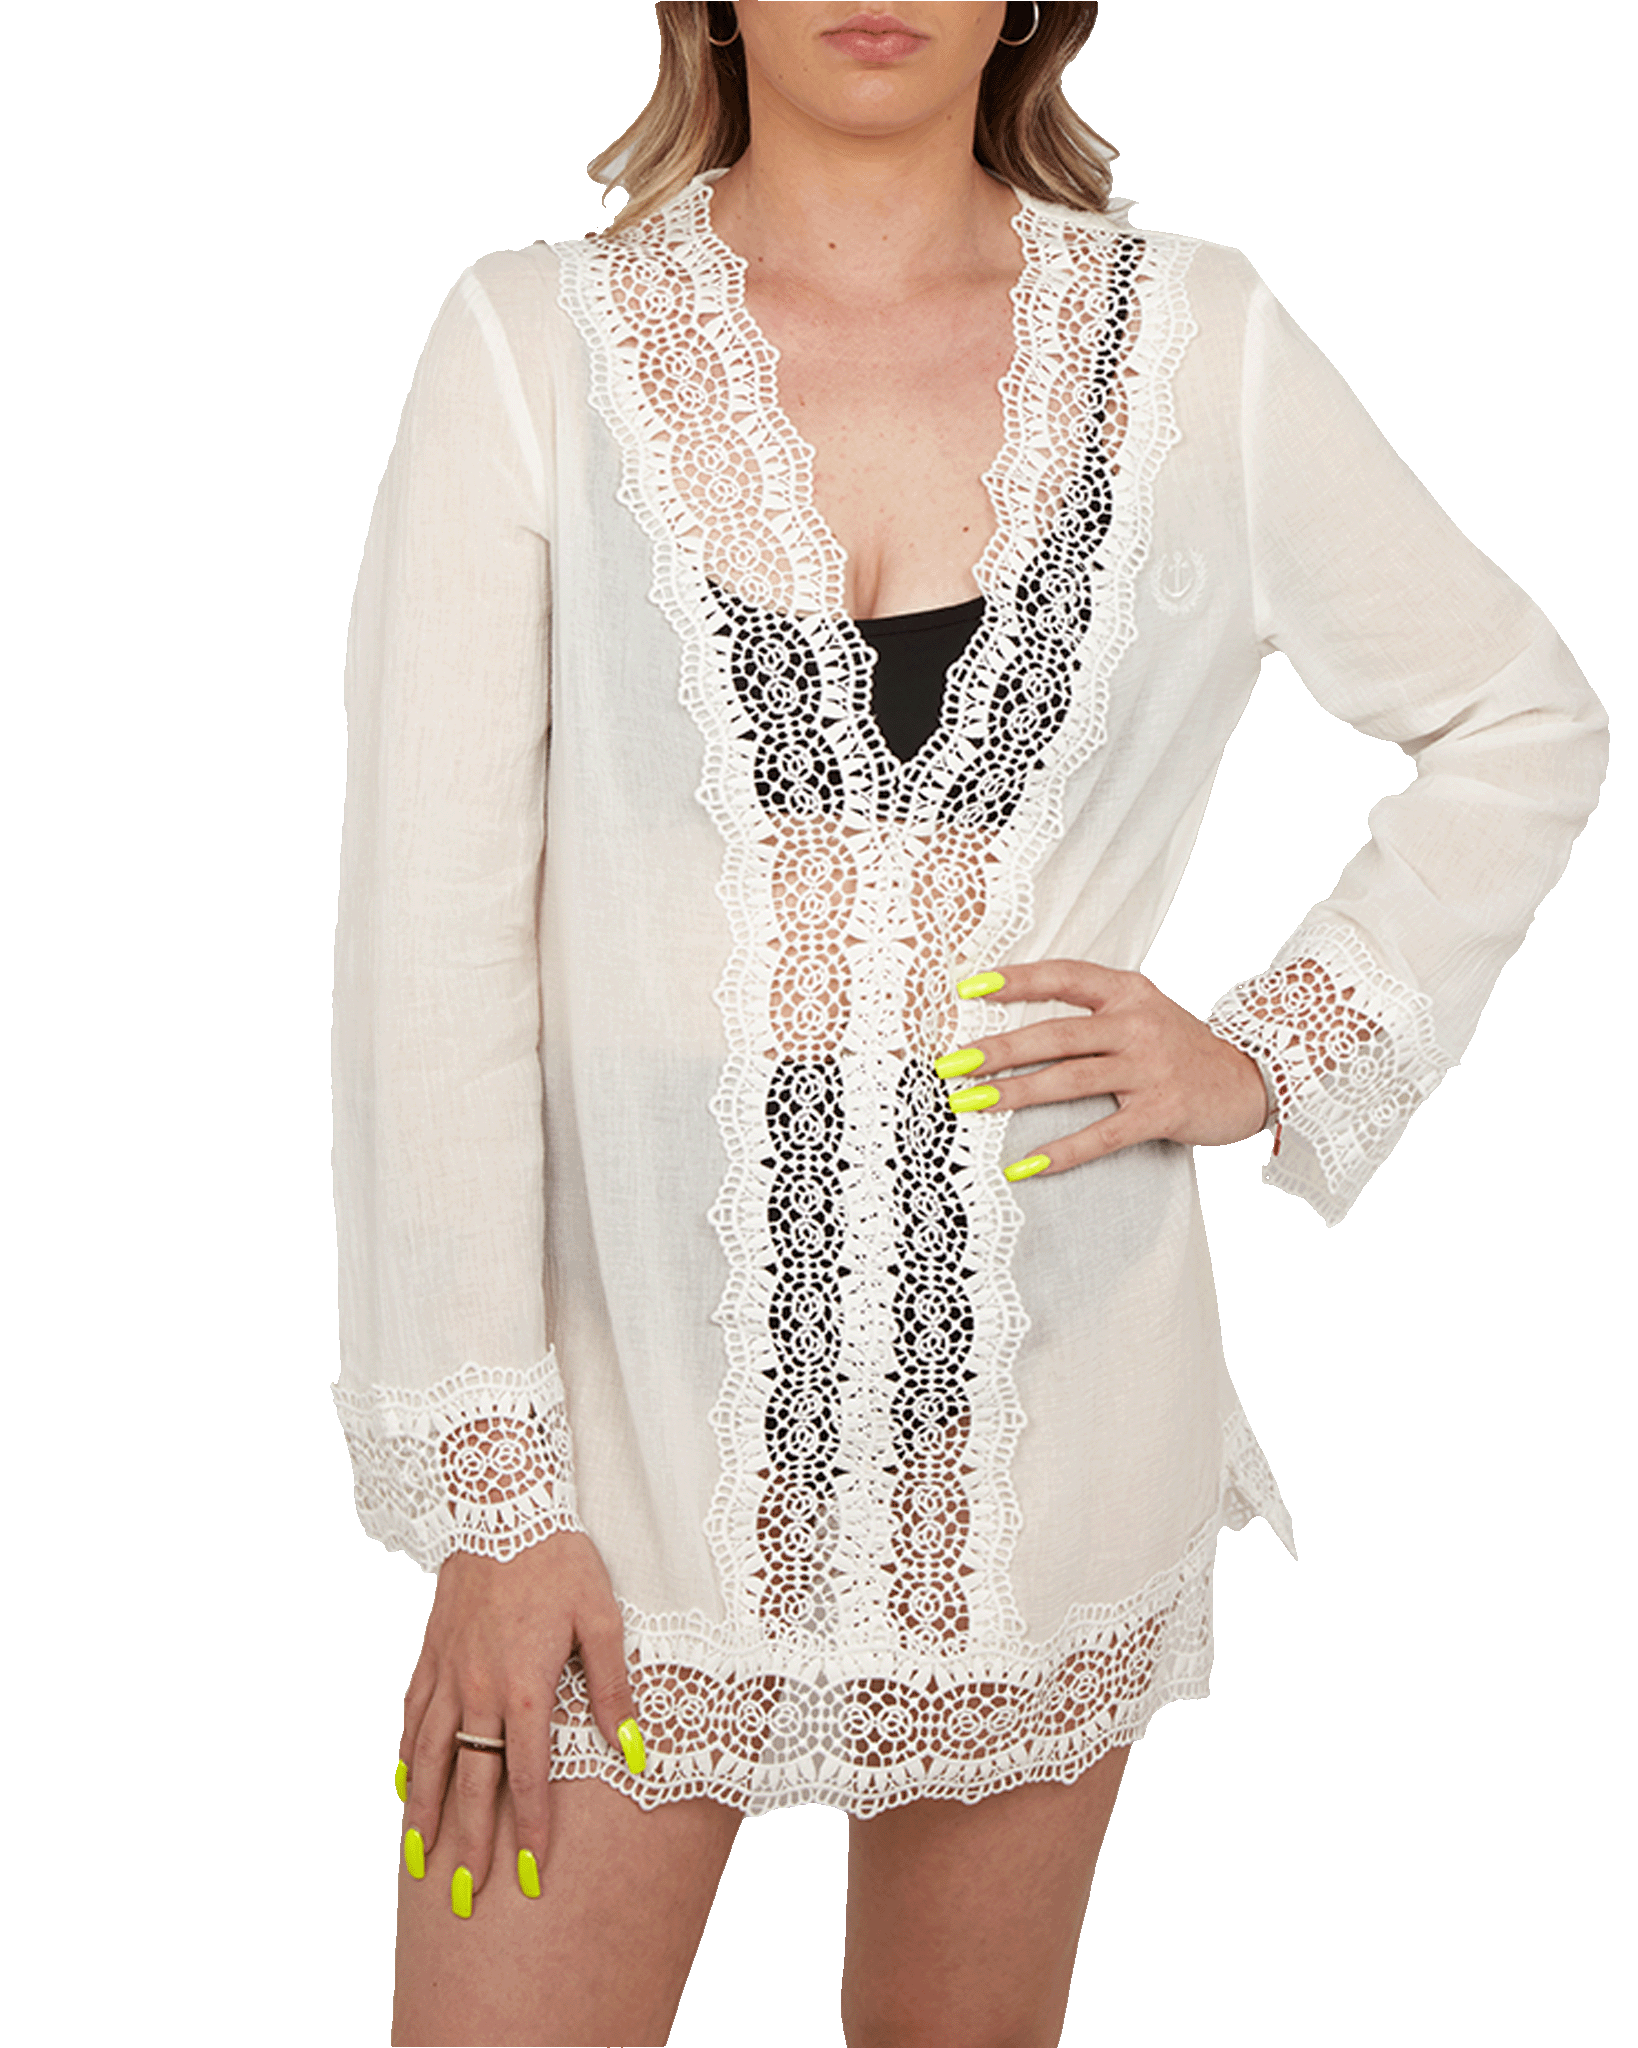 Women's Boho Lace Cover Up - White